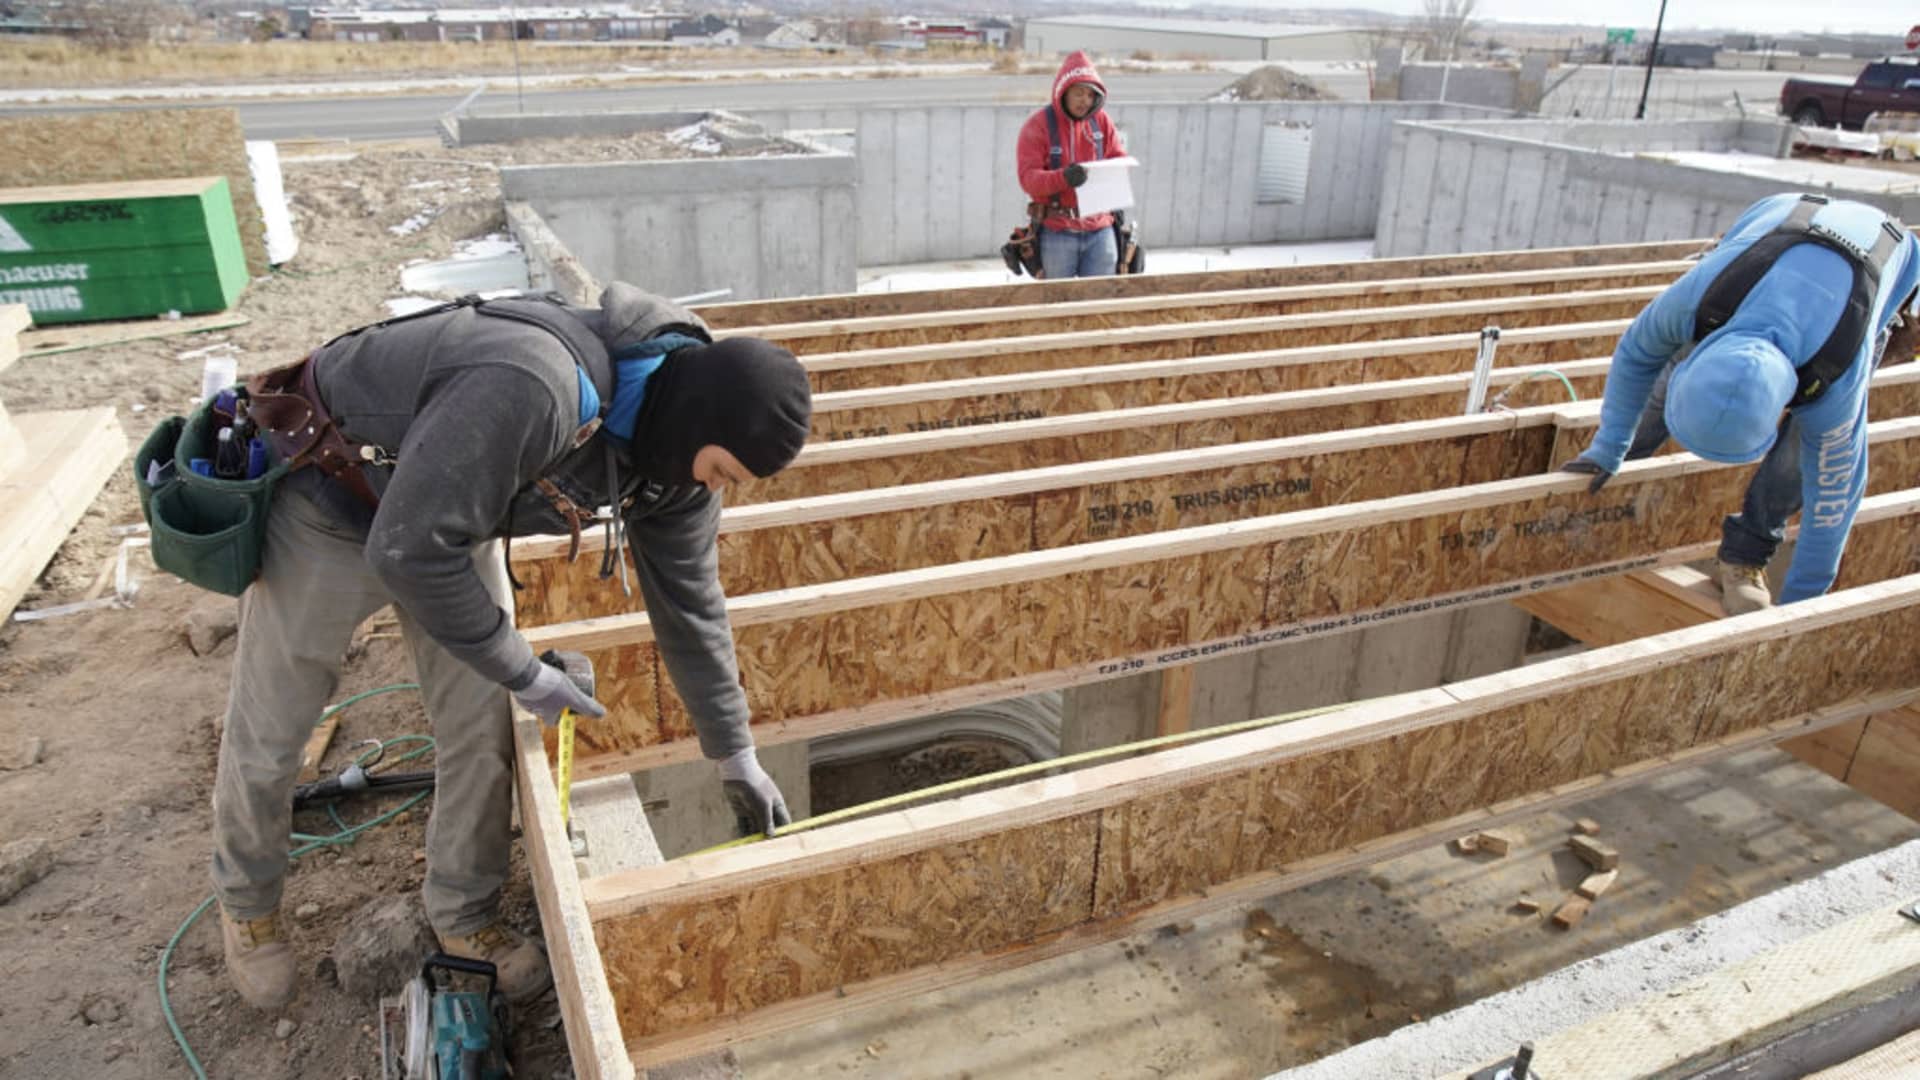 Contractors install floor beams on the foundation of a house under construction in Lehi, Utah, Dec. 16, 2020.